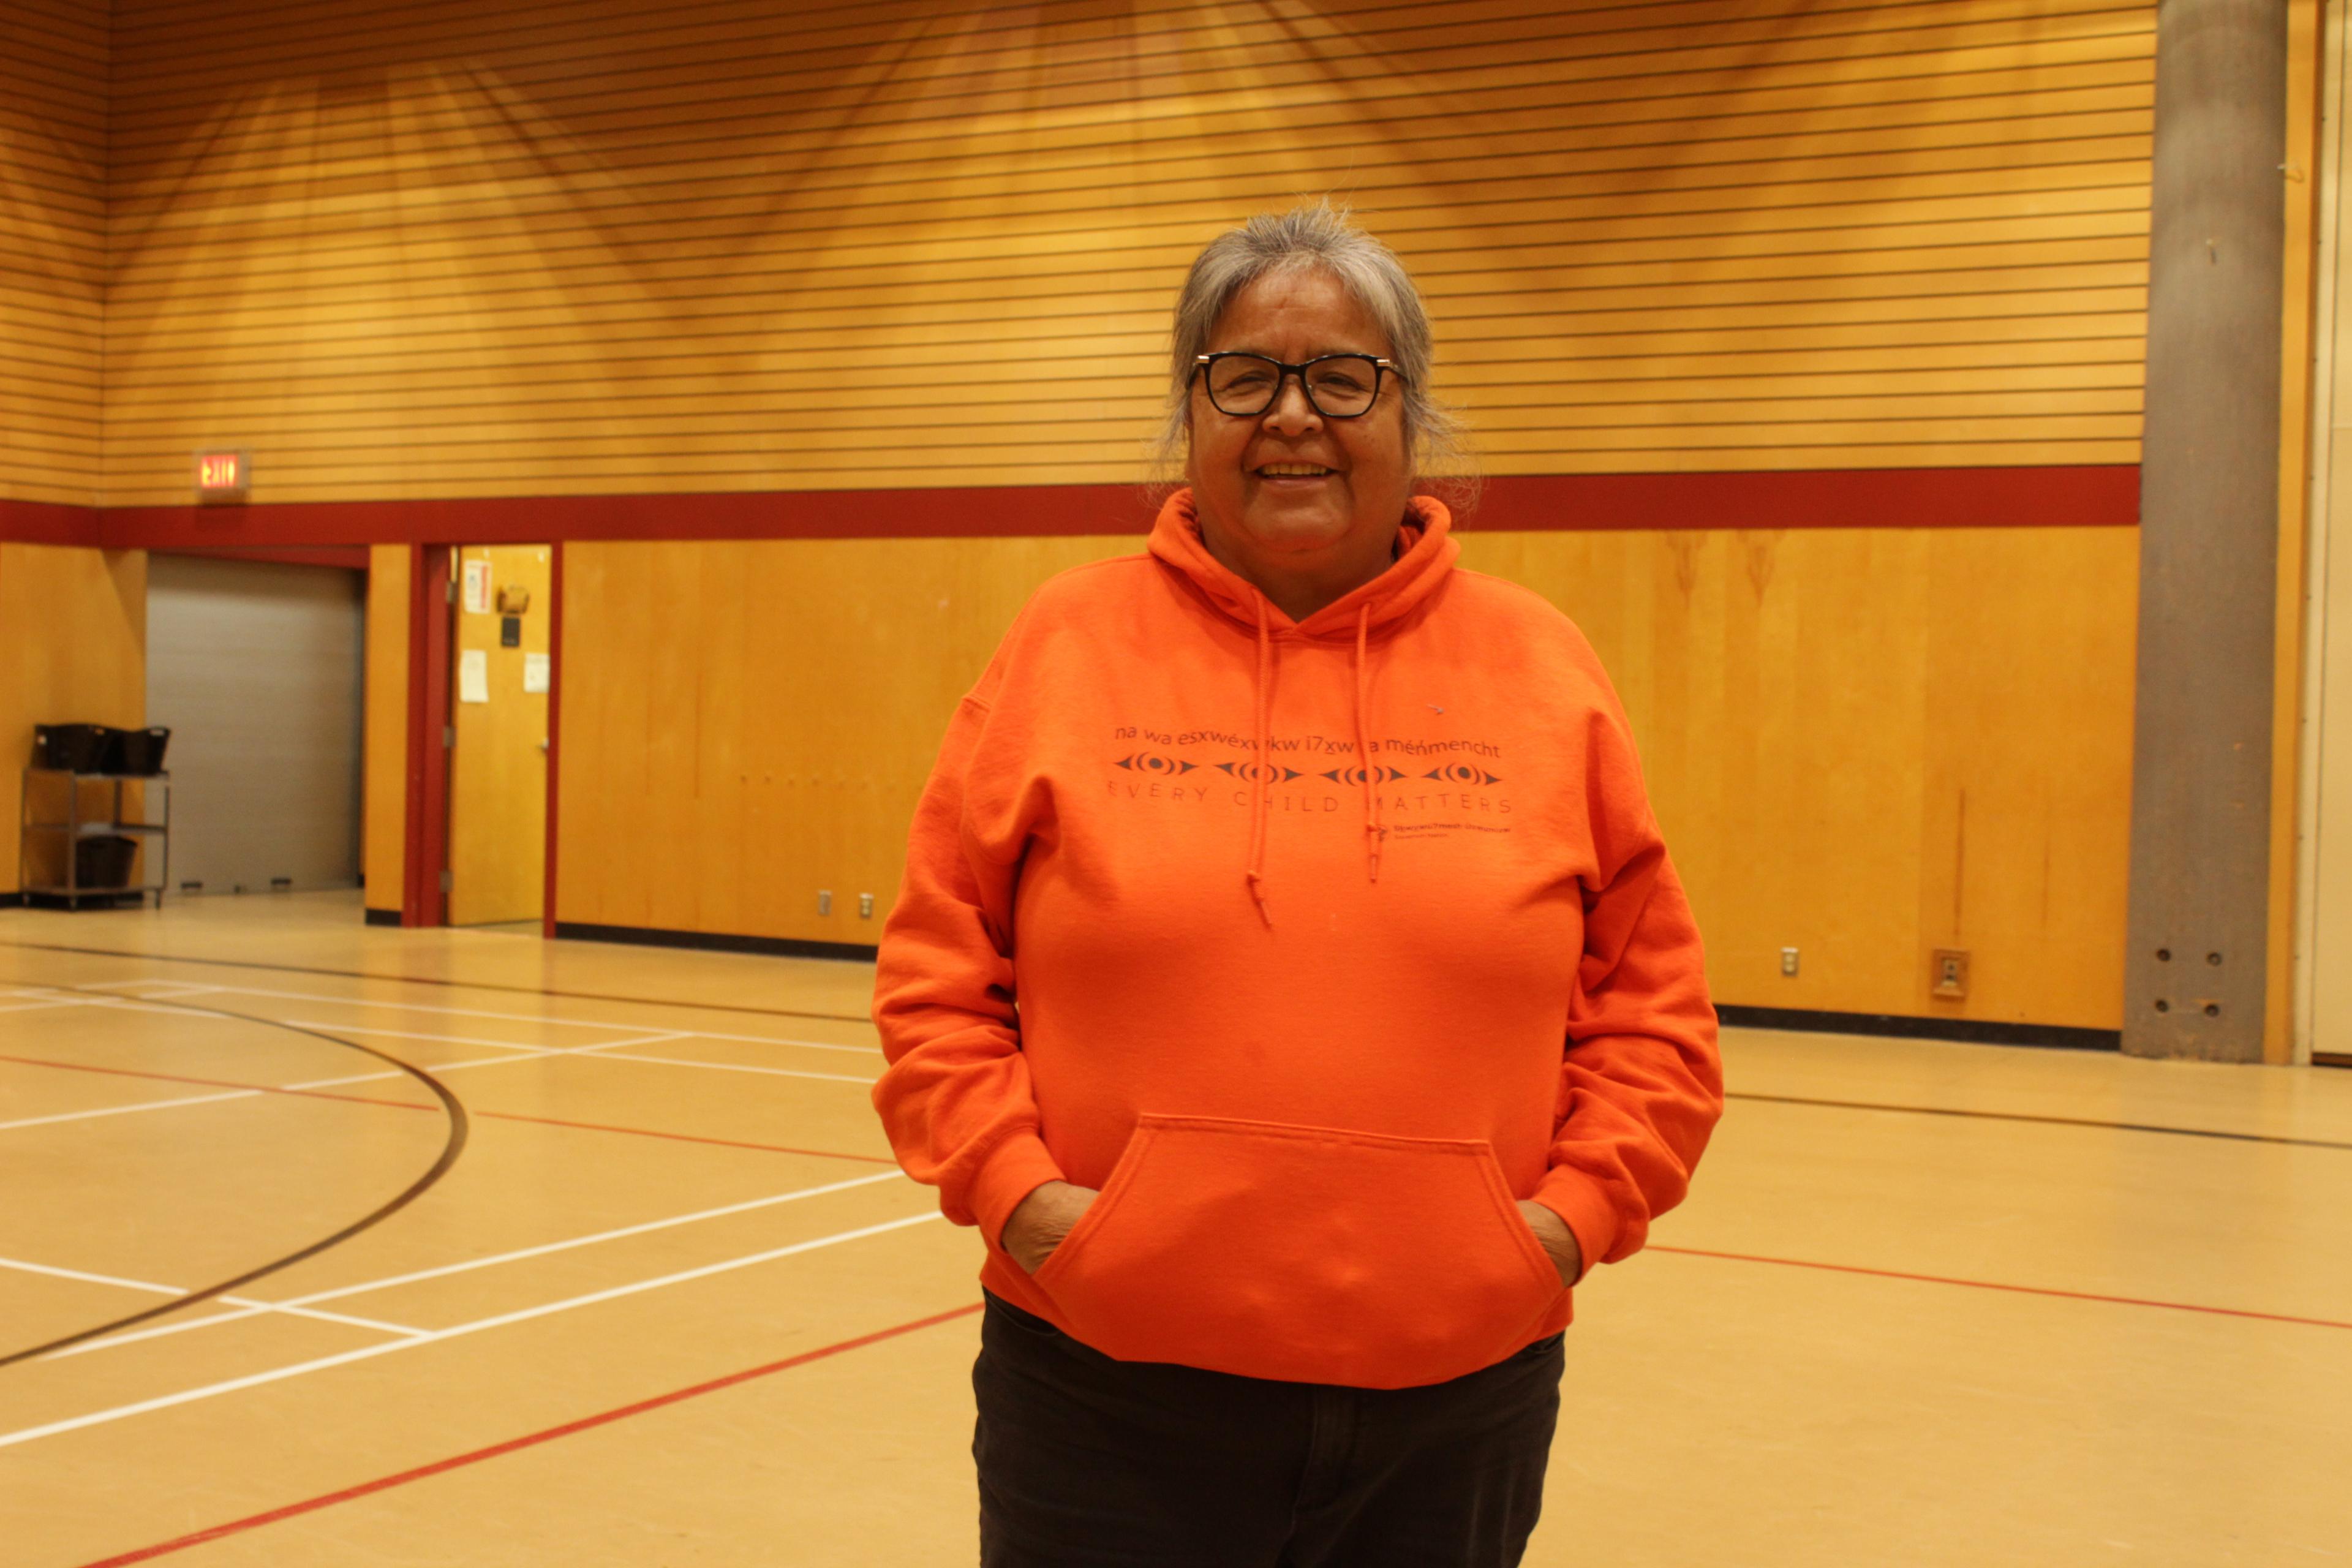 An elder 🧡 at our Squamish status card event